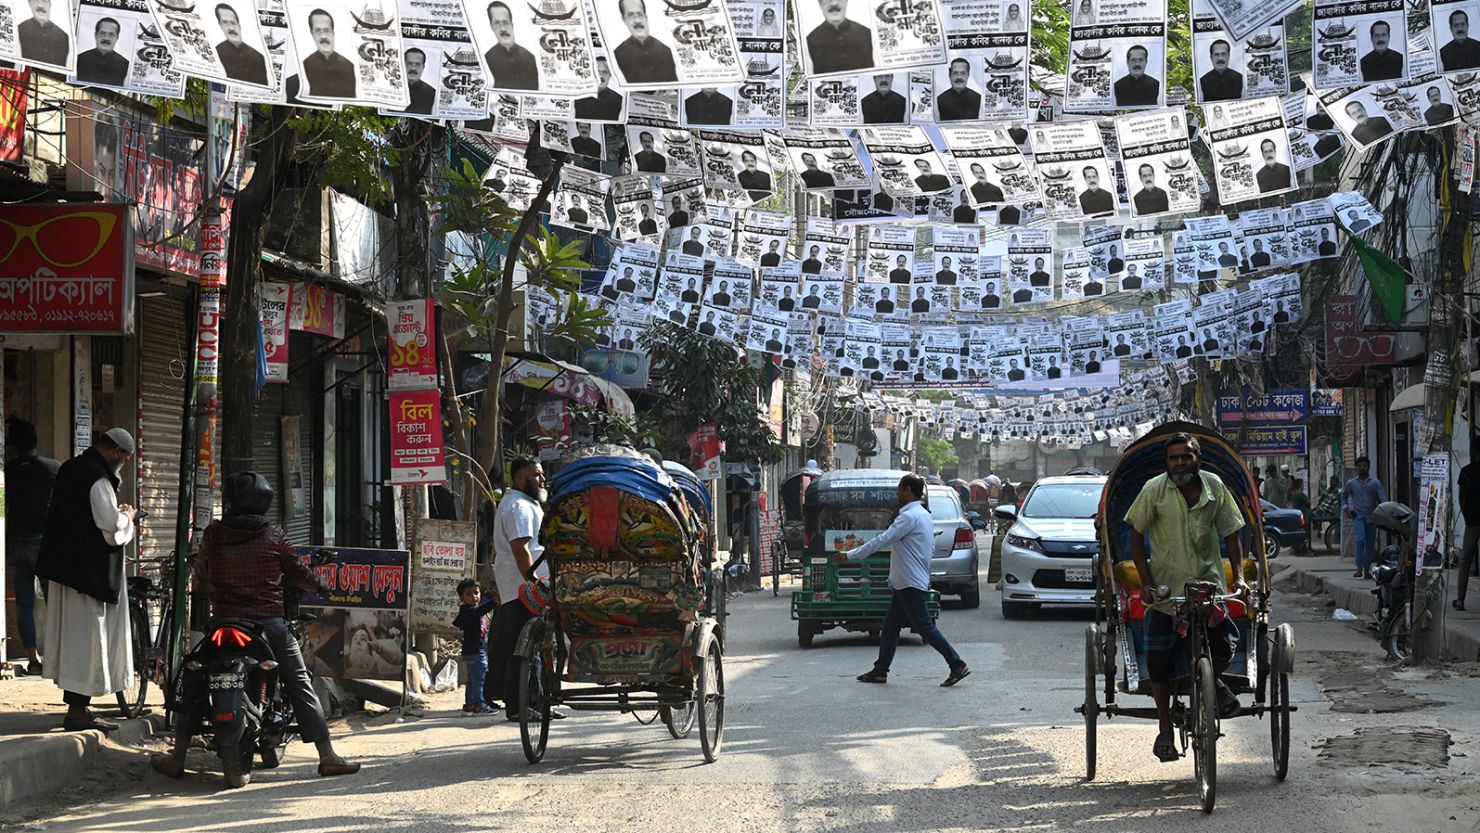 A Bangladeshi citizen is walking under posters of the ruling Bangladesh Awami League election candidates that are hanging over a street during the general election campaign in Dhaka, Bangladesh, on December 20, 2023.